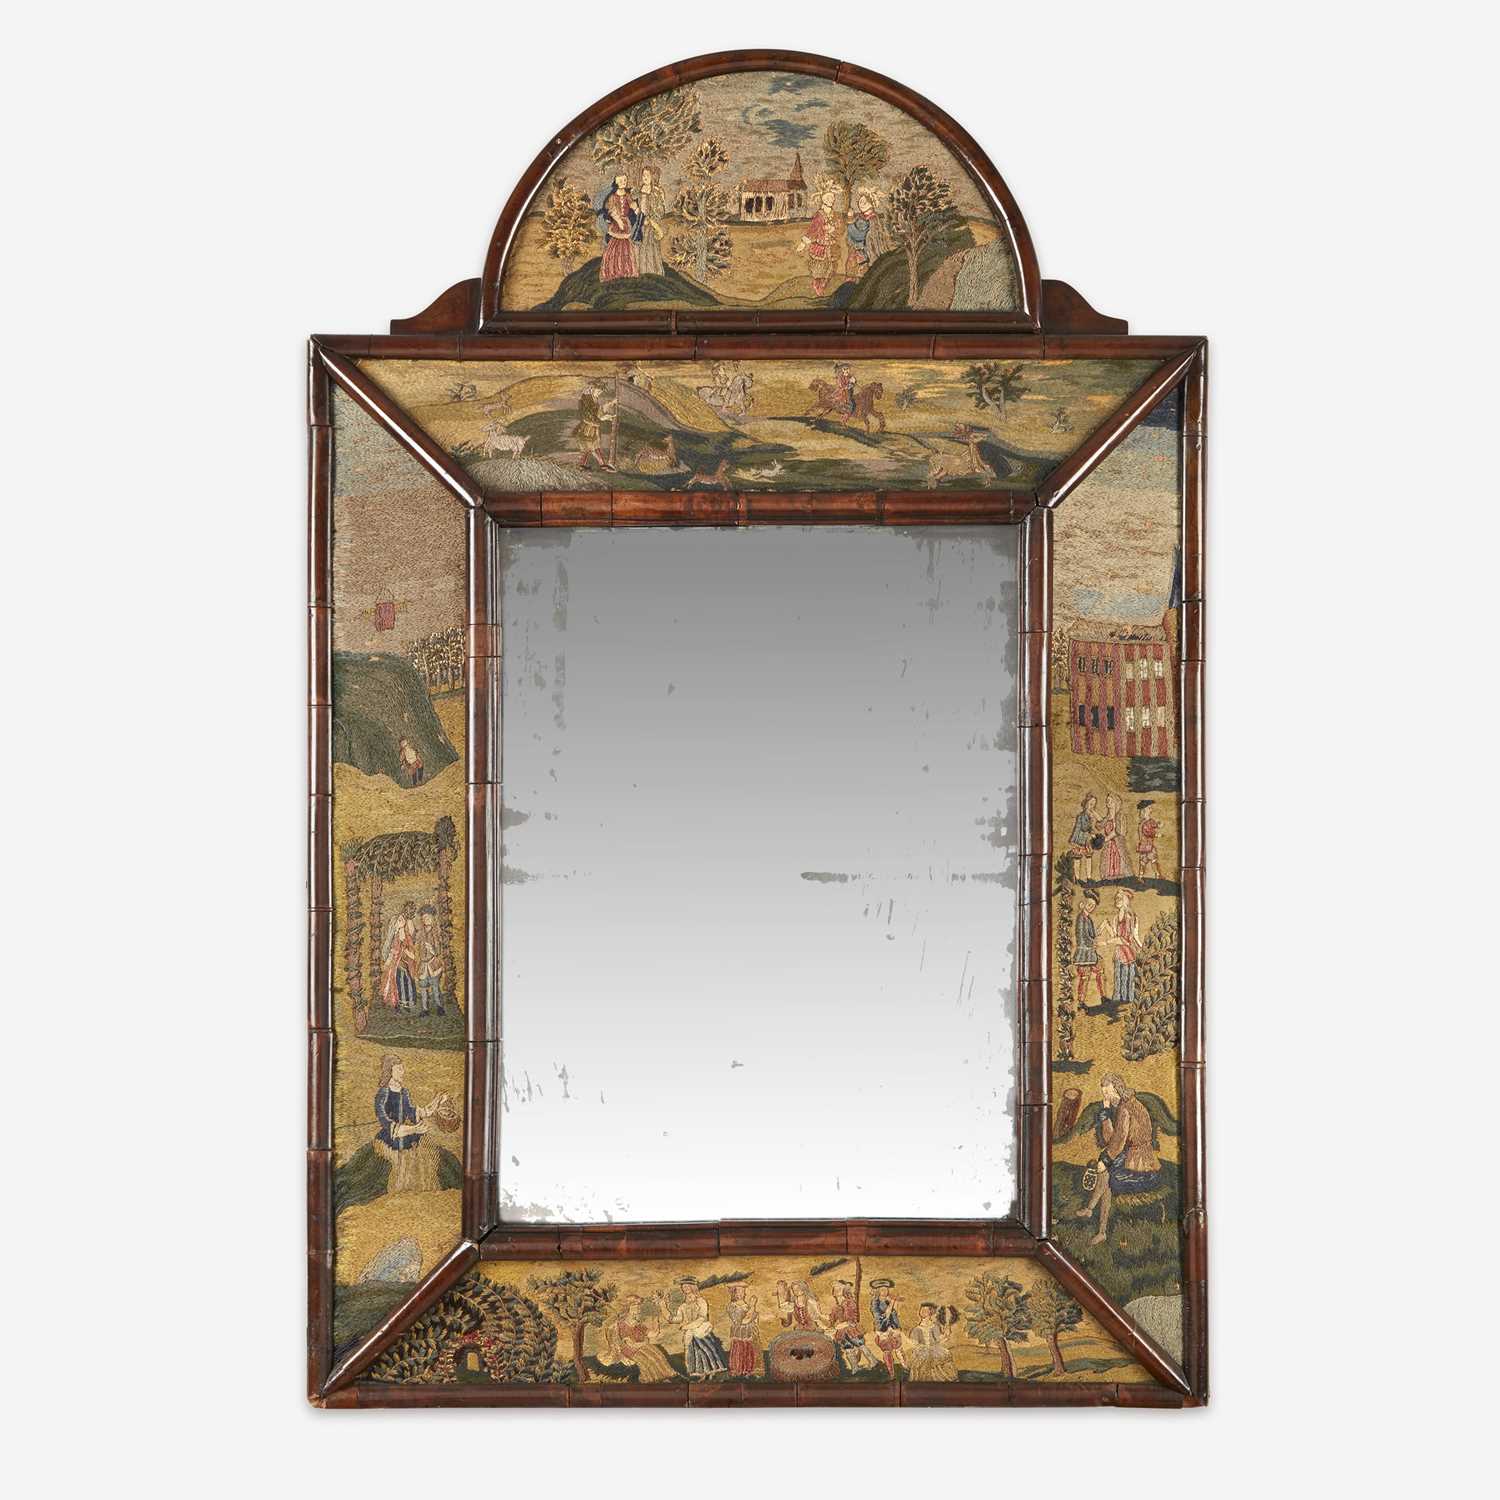 Lot 17 - A Queen Anne style needlework and burl walnut mirror